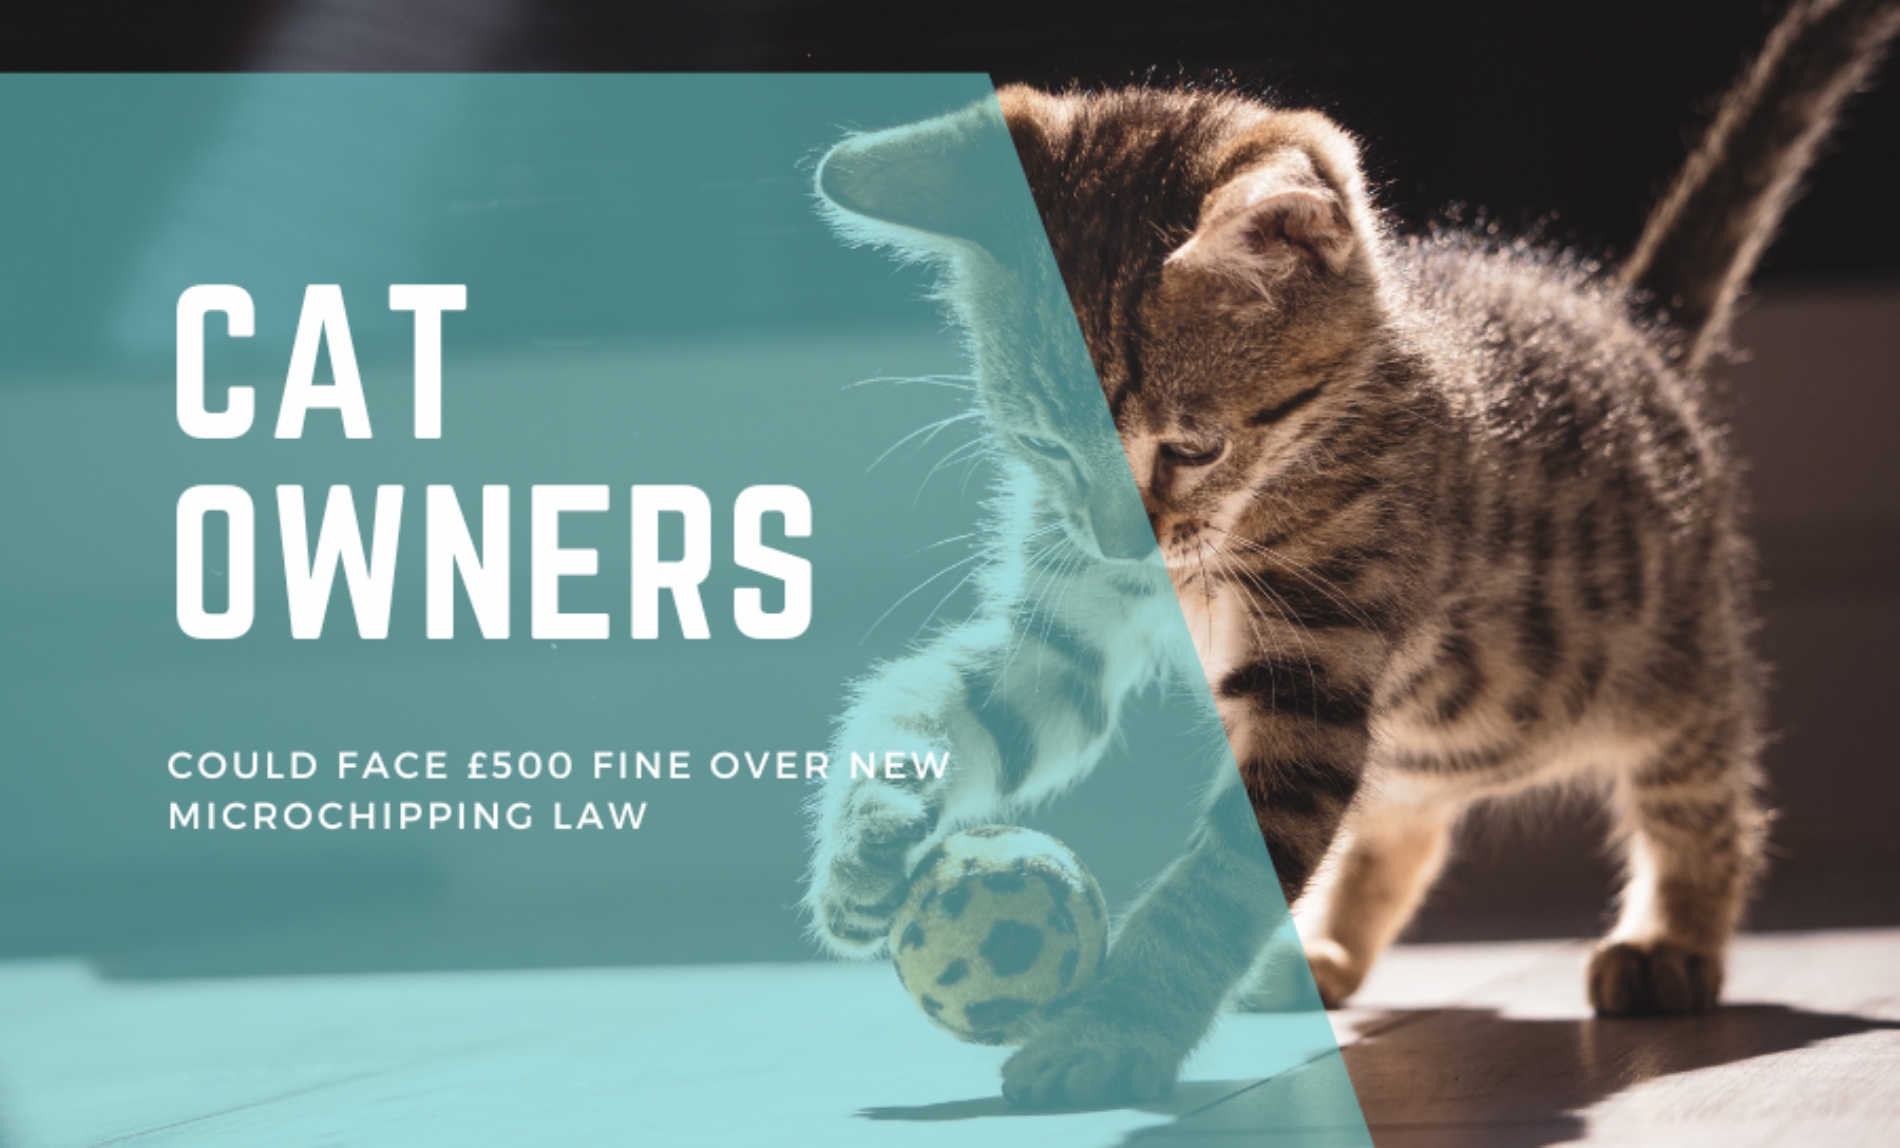 Cat owners could face £500  fine over new microchipping law.